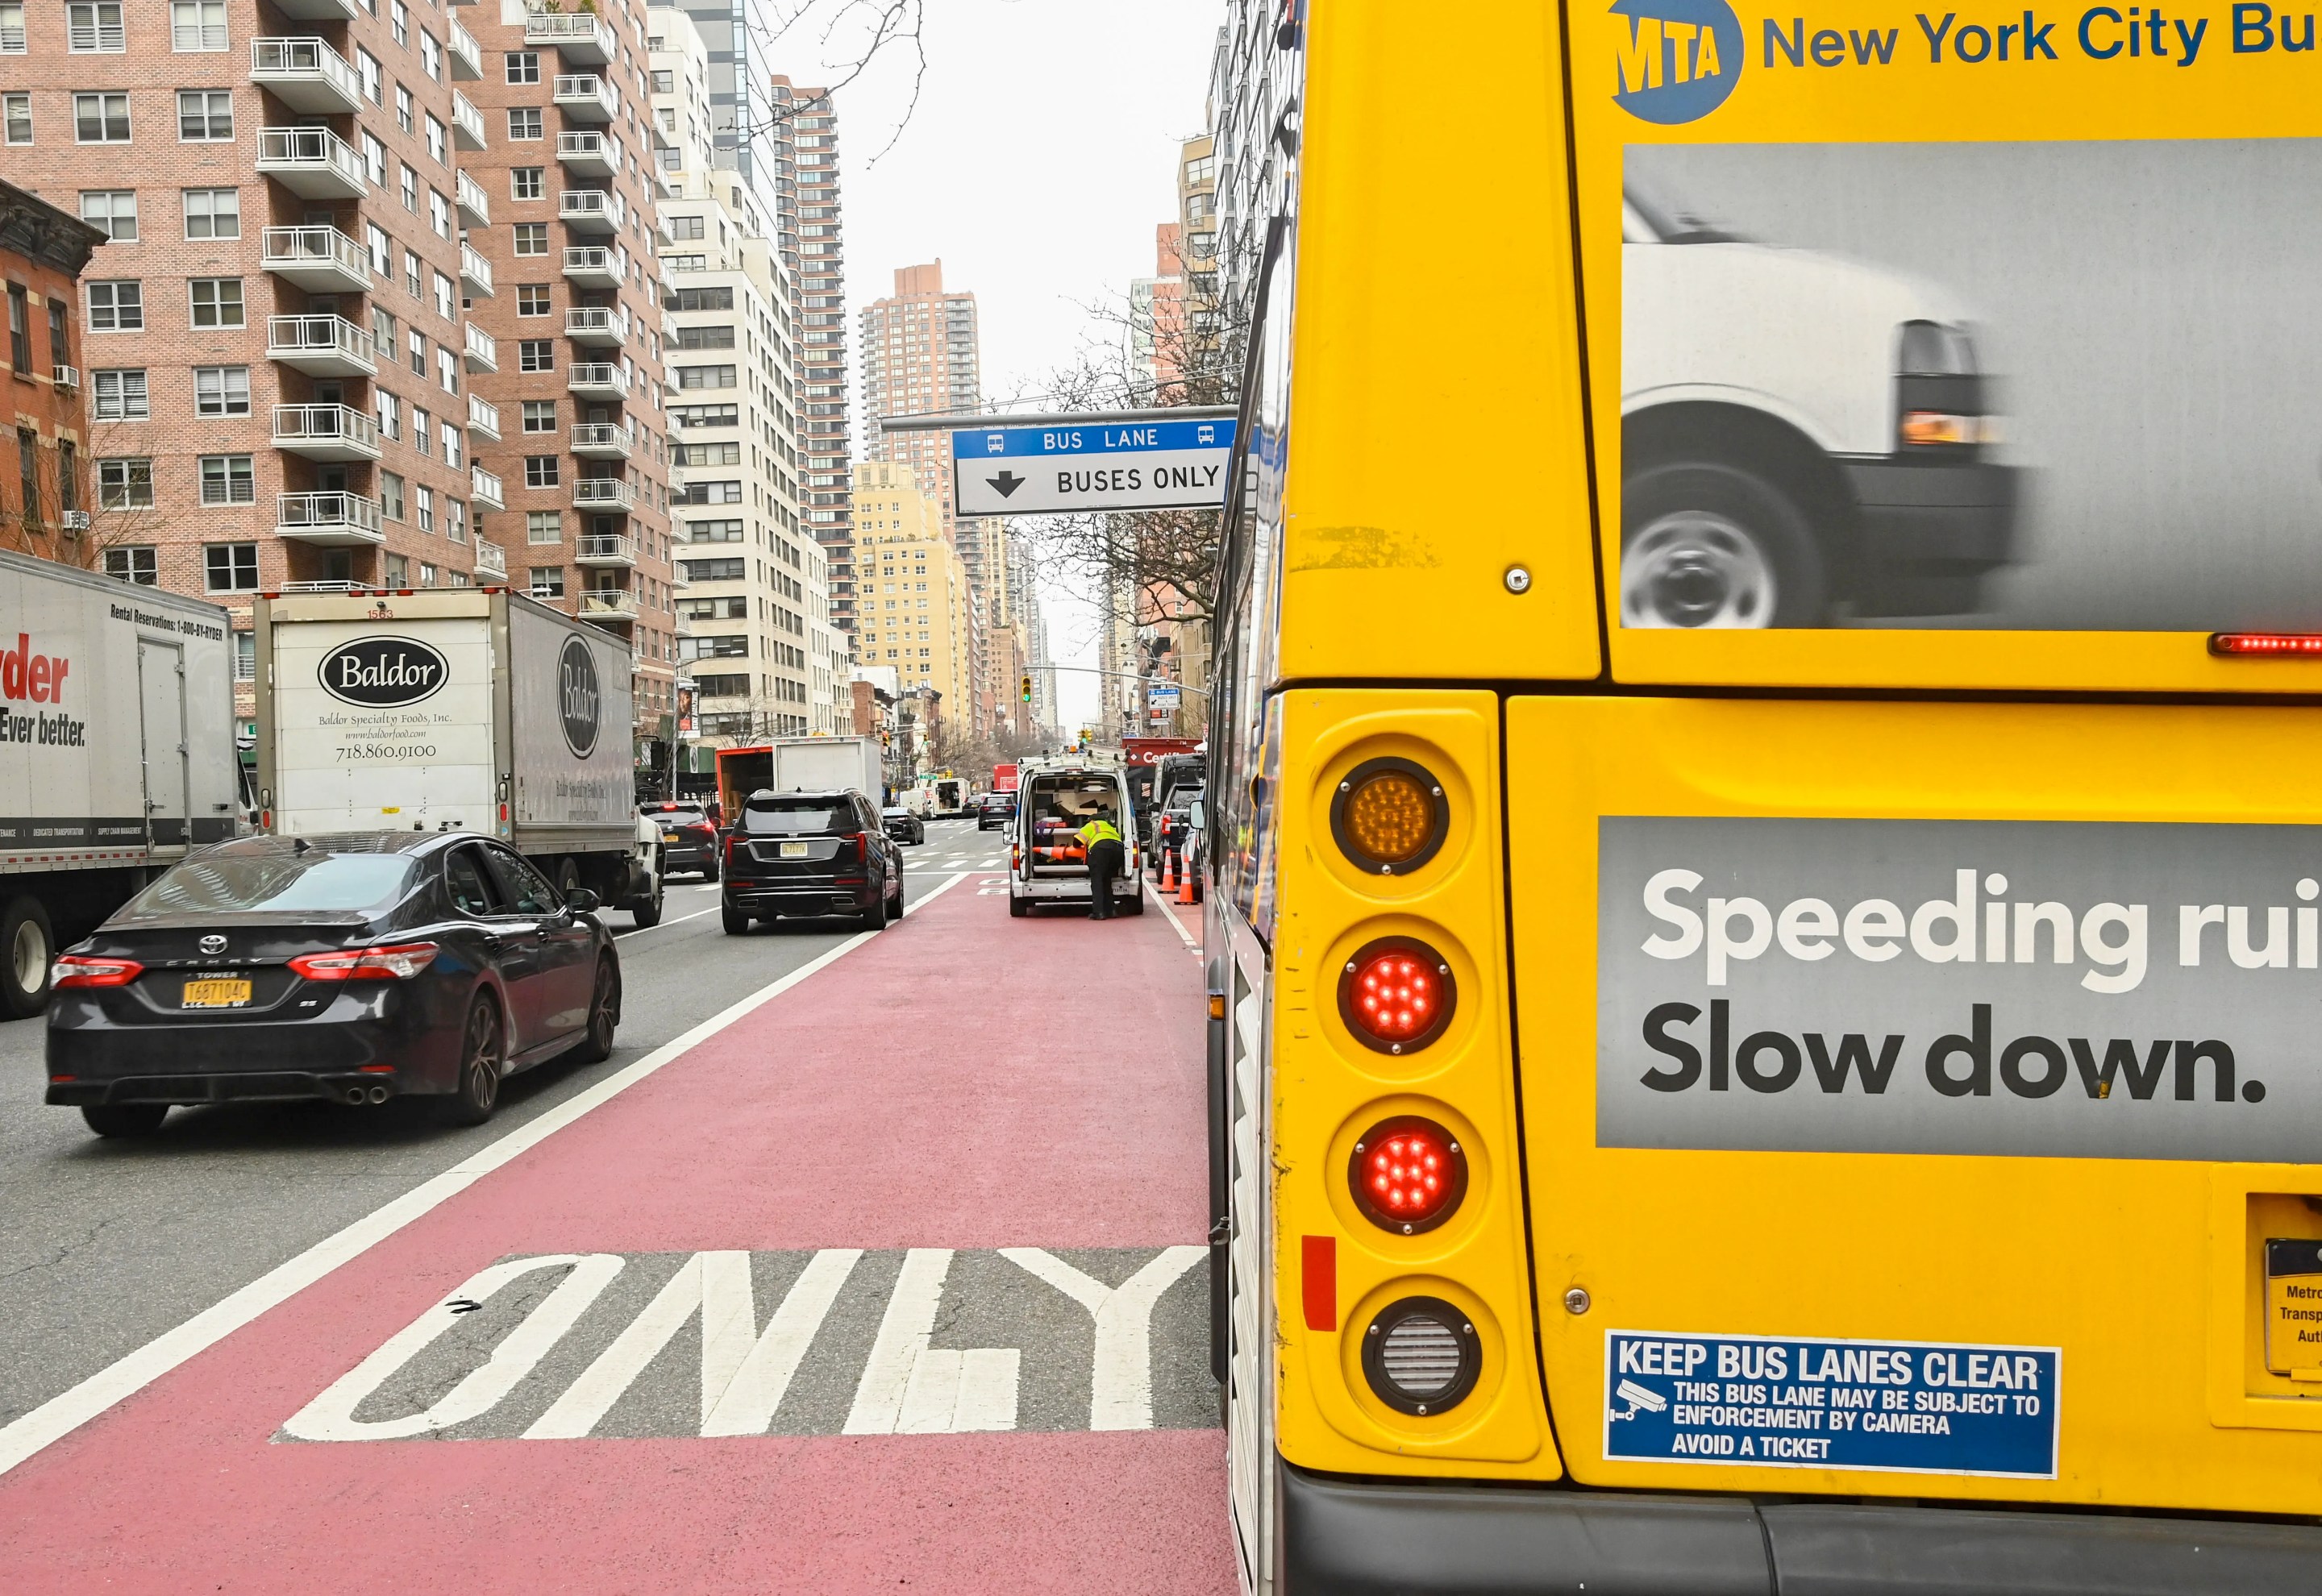 A view of a New York city street with a red "BUS ONLY" lane in the middle of the image, and the yellow rear end of an MTA city bus at right. The rear of the bus includes a blue sticker that says "KEEP BUS LANES CLEAR" and "This bus lane may be subject to enforcement by camera - avoid a ticket"